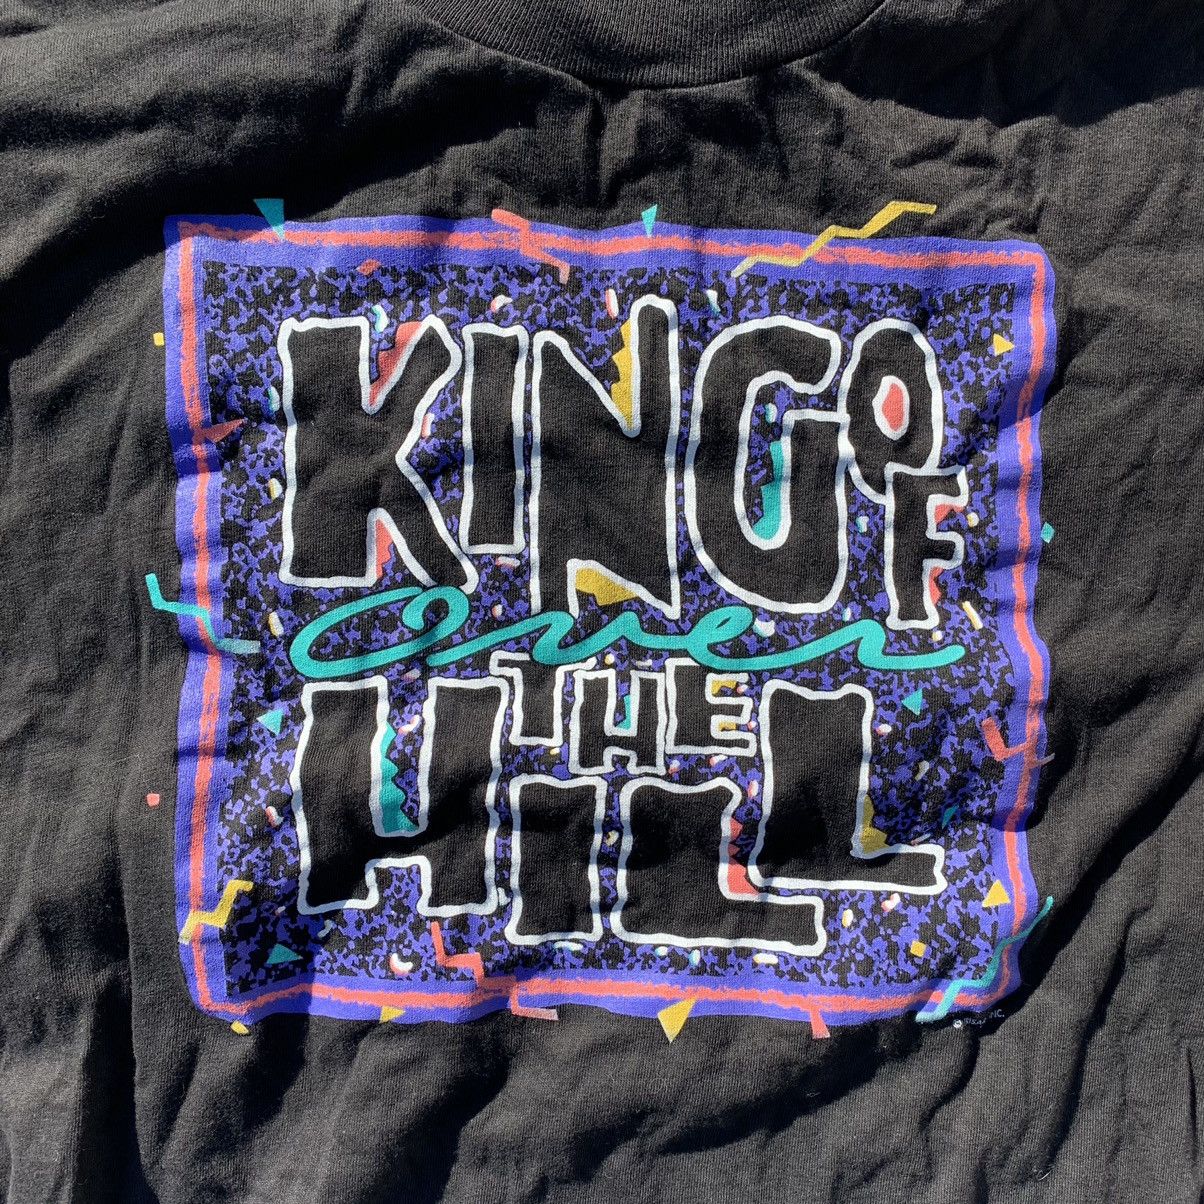 Vintage 90s Vintage King of Over the Hill Graphic T-Shirt Size US XL / EU 56 / 4 - 2 Preview